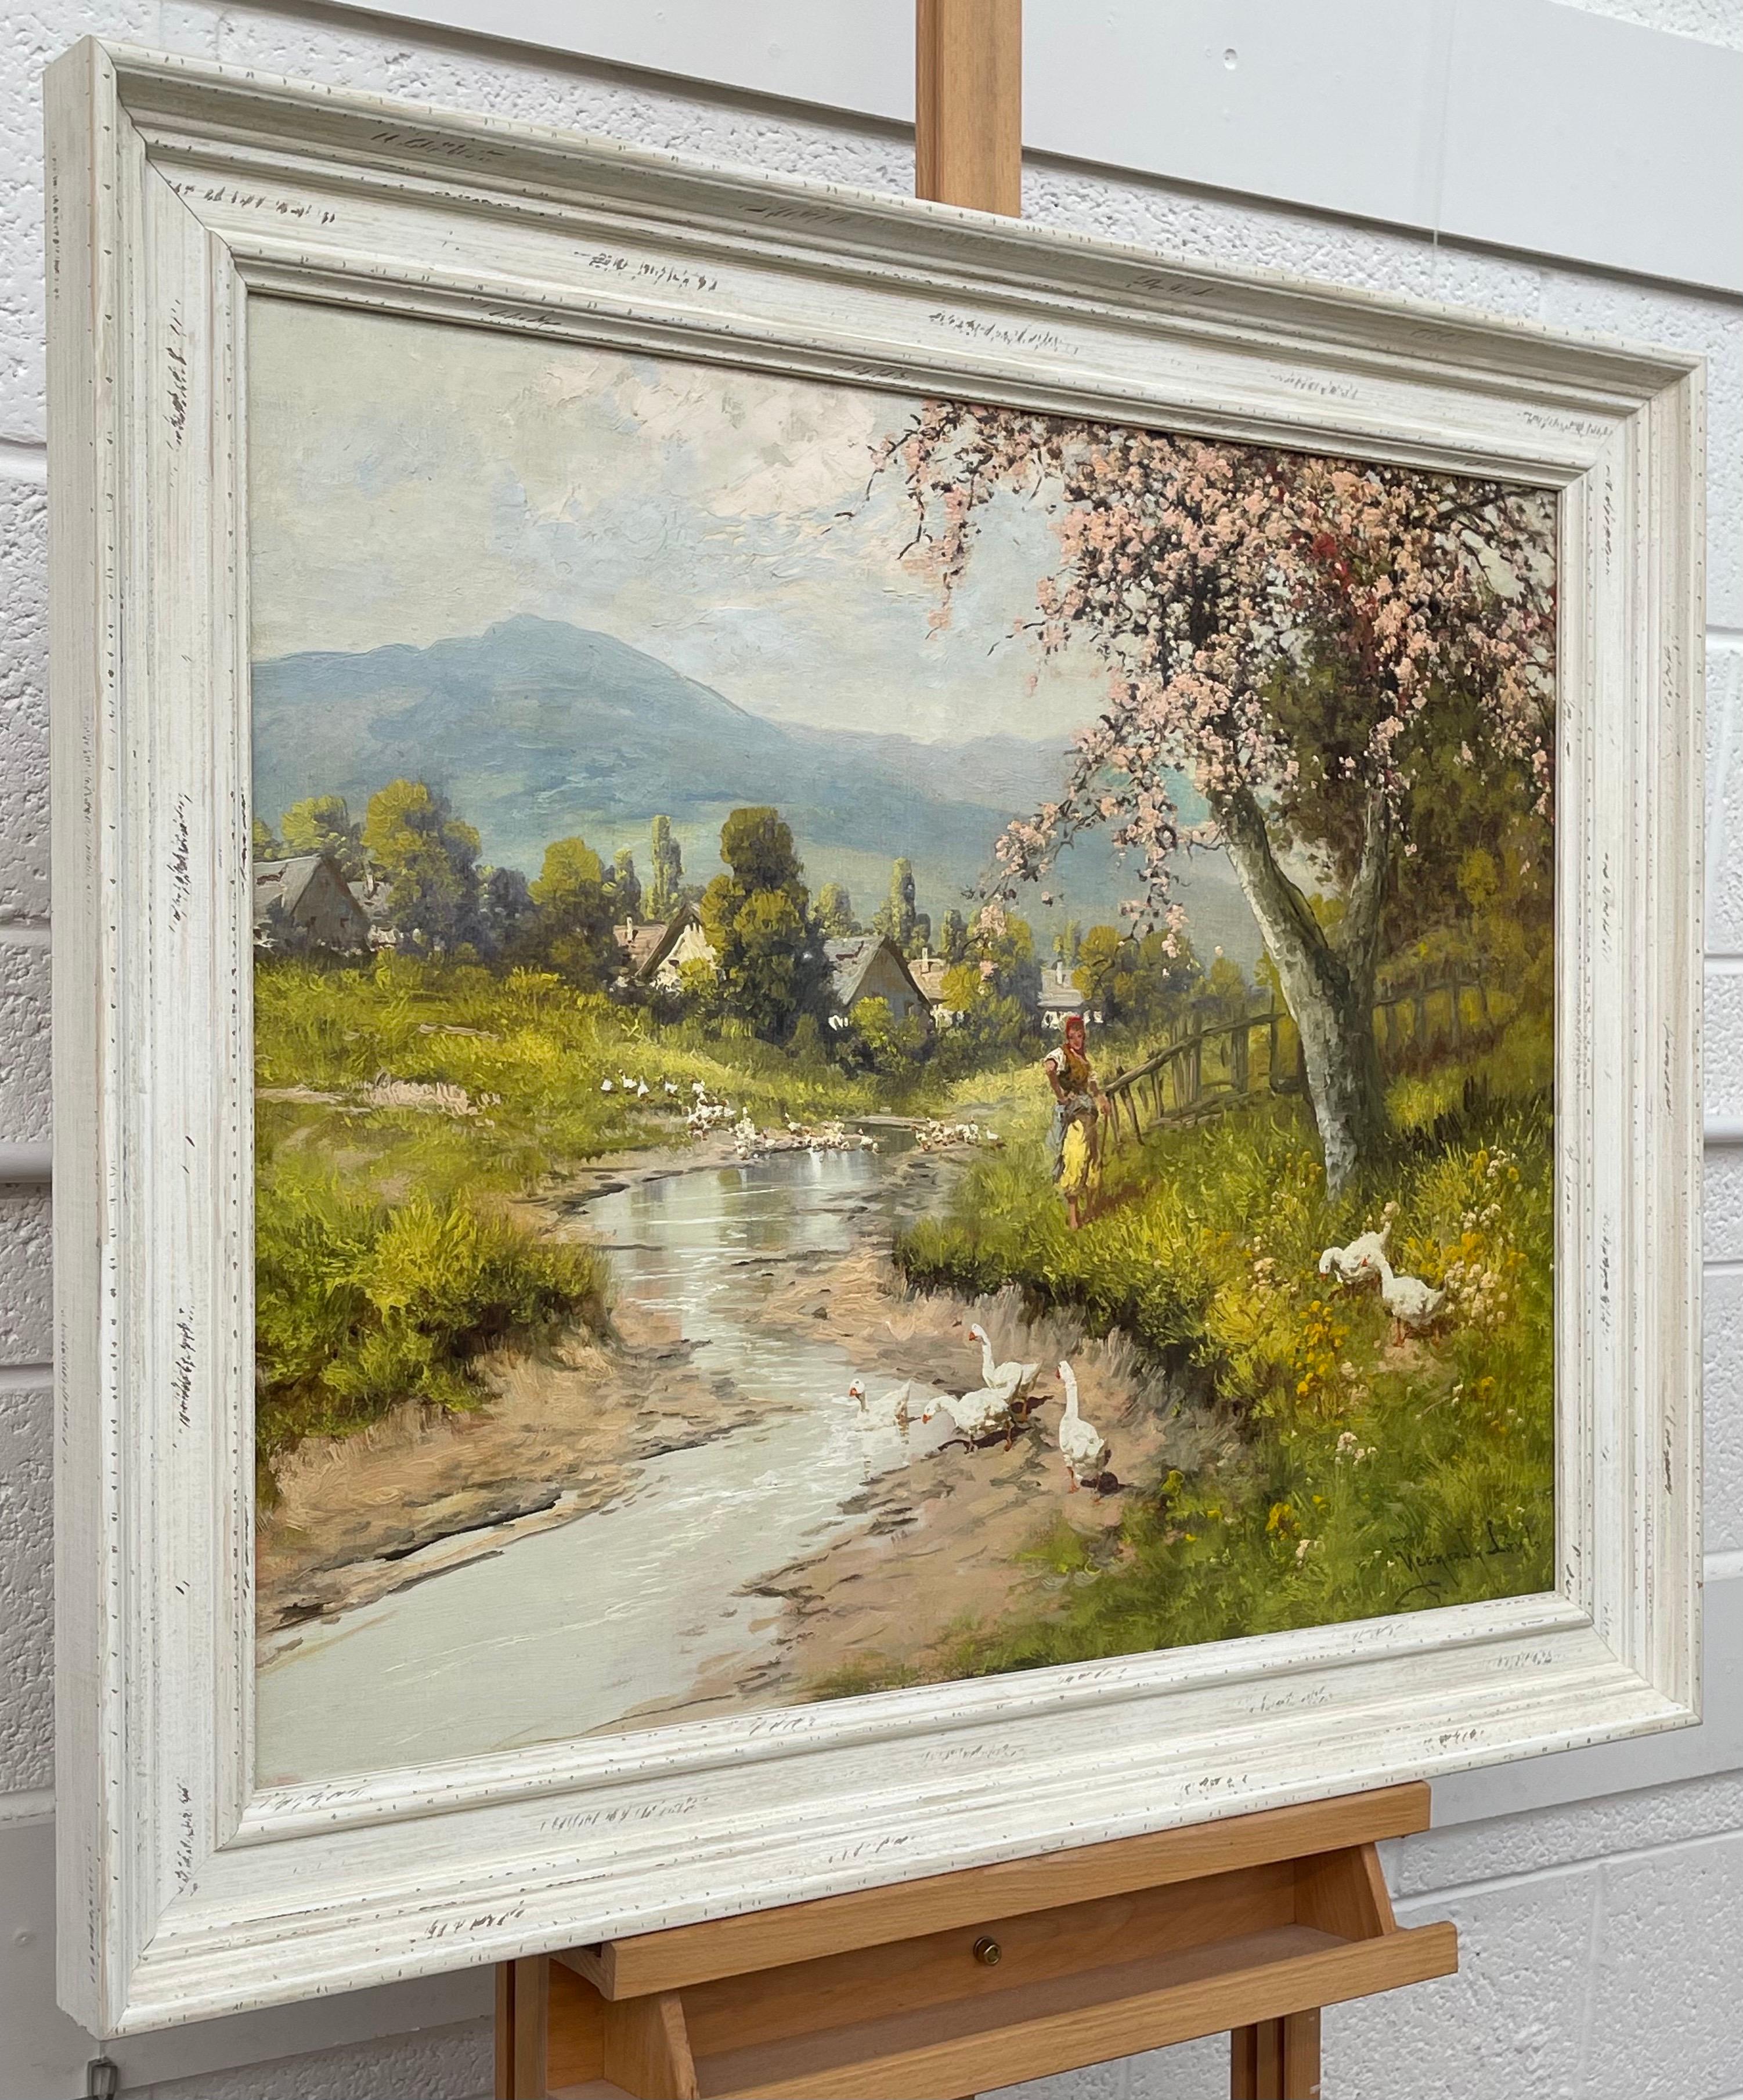 Countryside Village River Scene with Tree Blossom, Figure and Geese 20th Century - Painting by Laszlo Neogrady